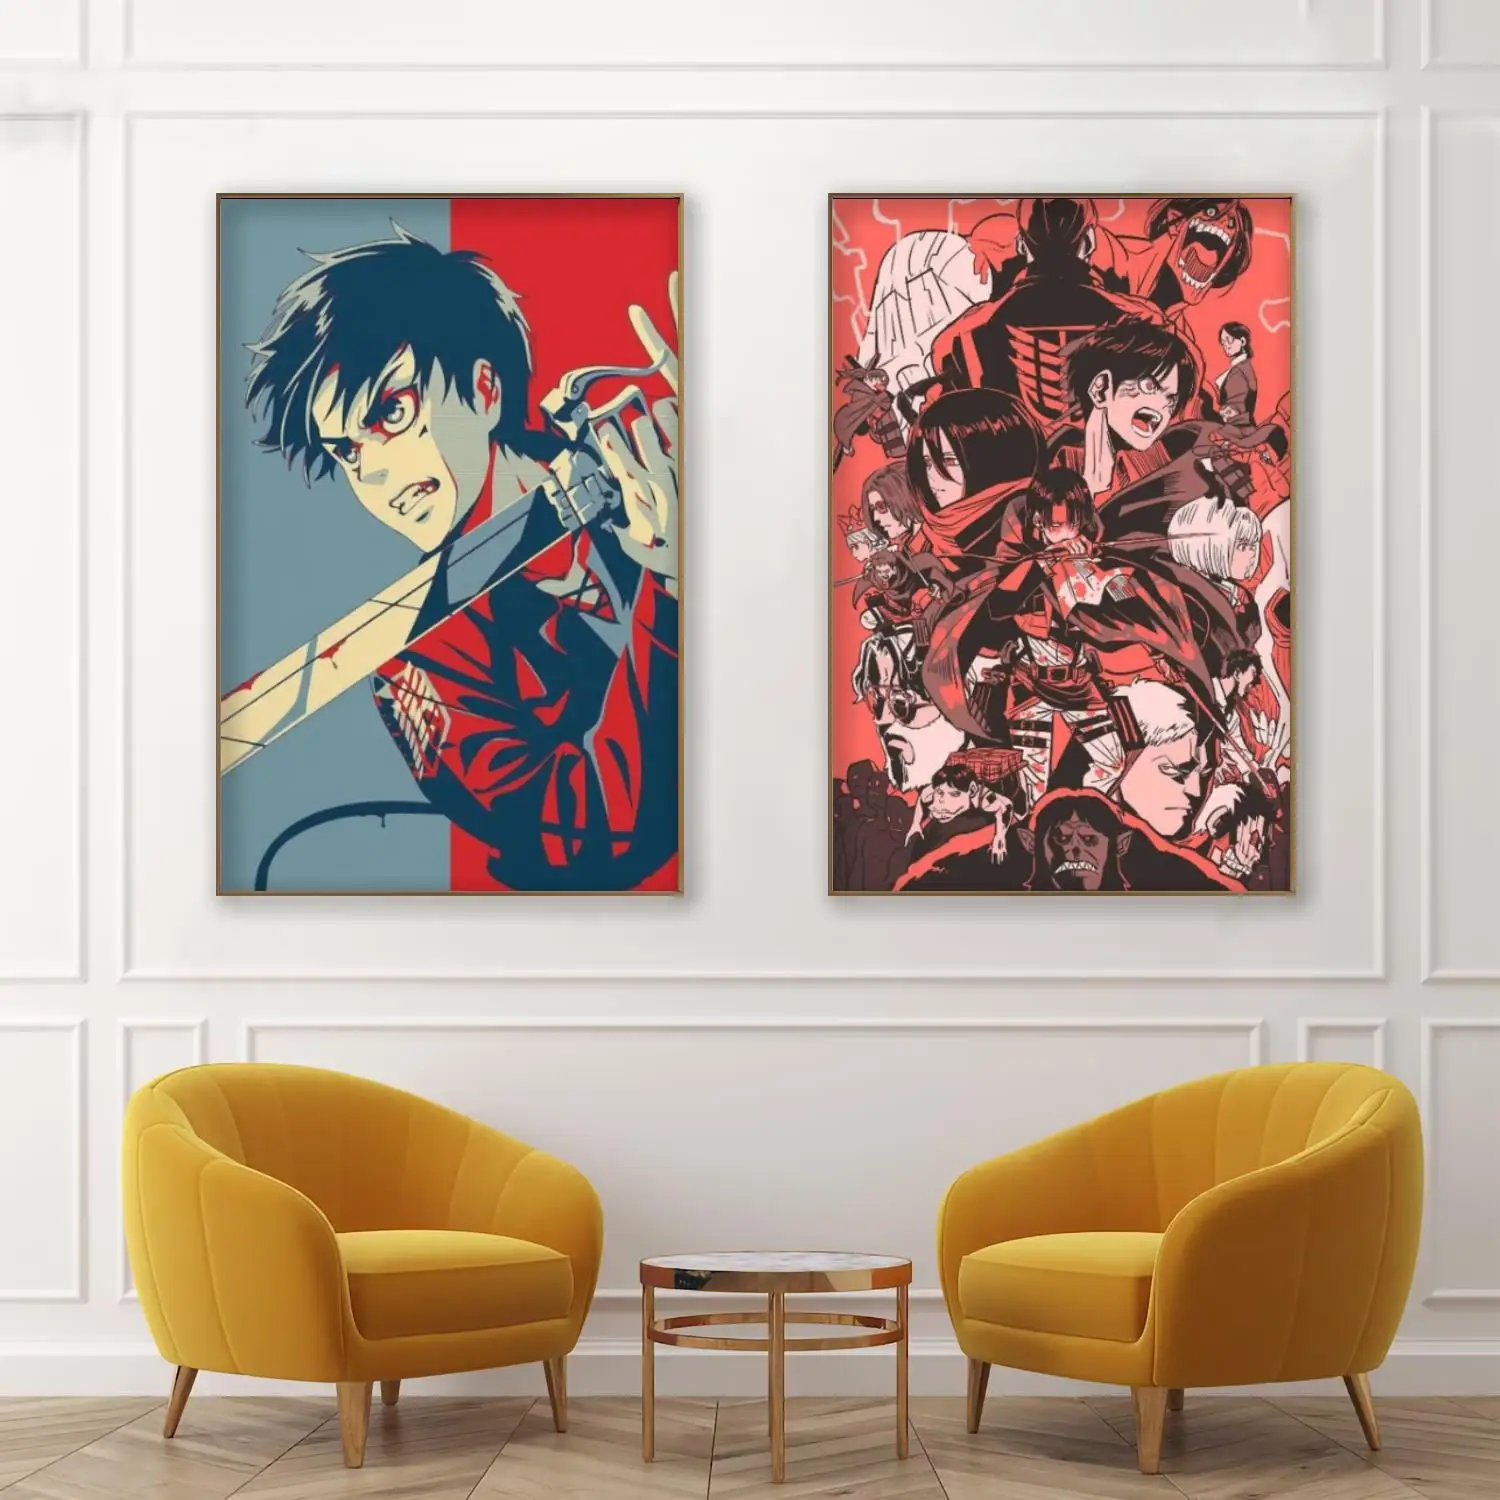 Eren Attack on Titan Anime Decorative Painting Living Room Wall Art Canvas Poster